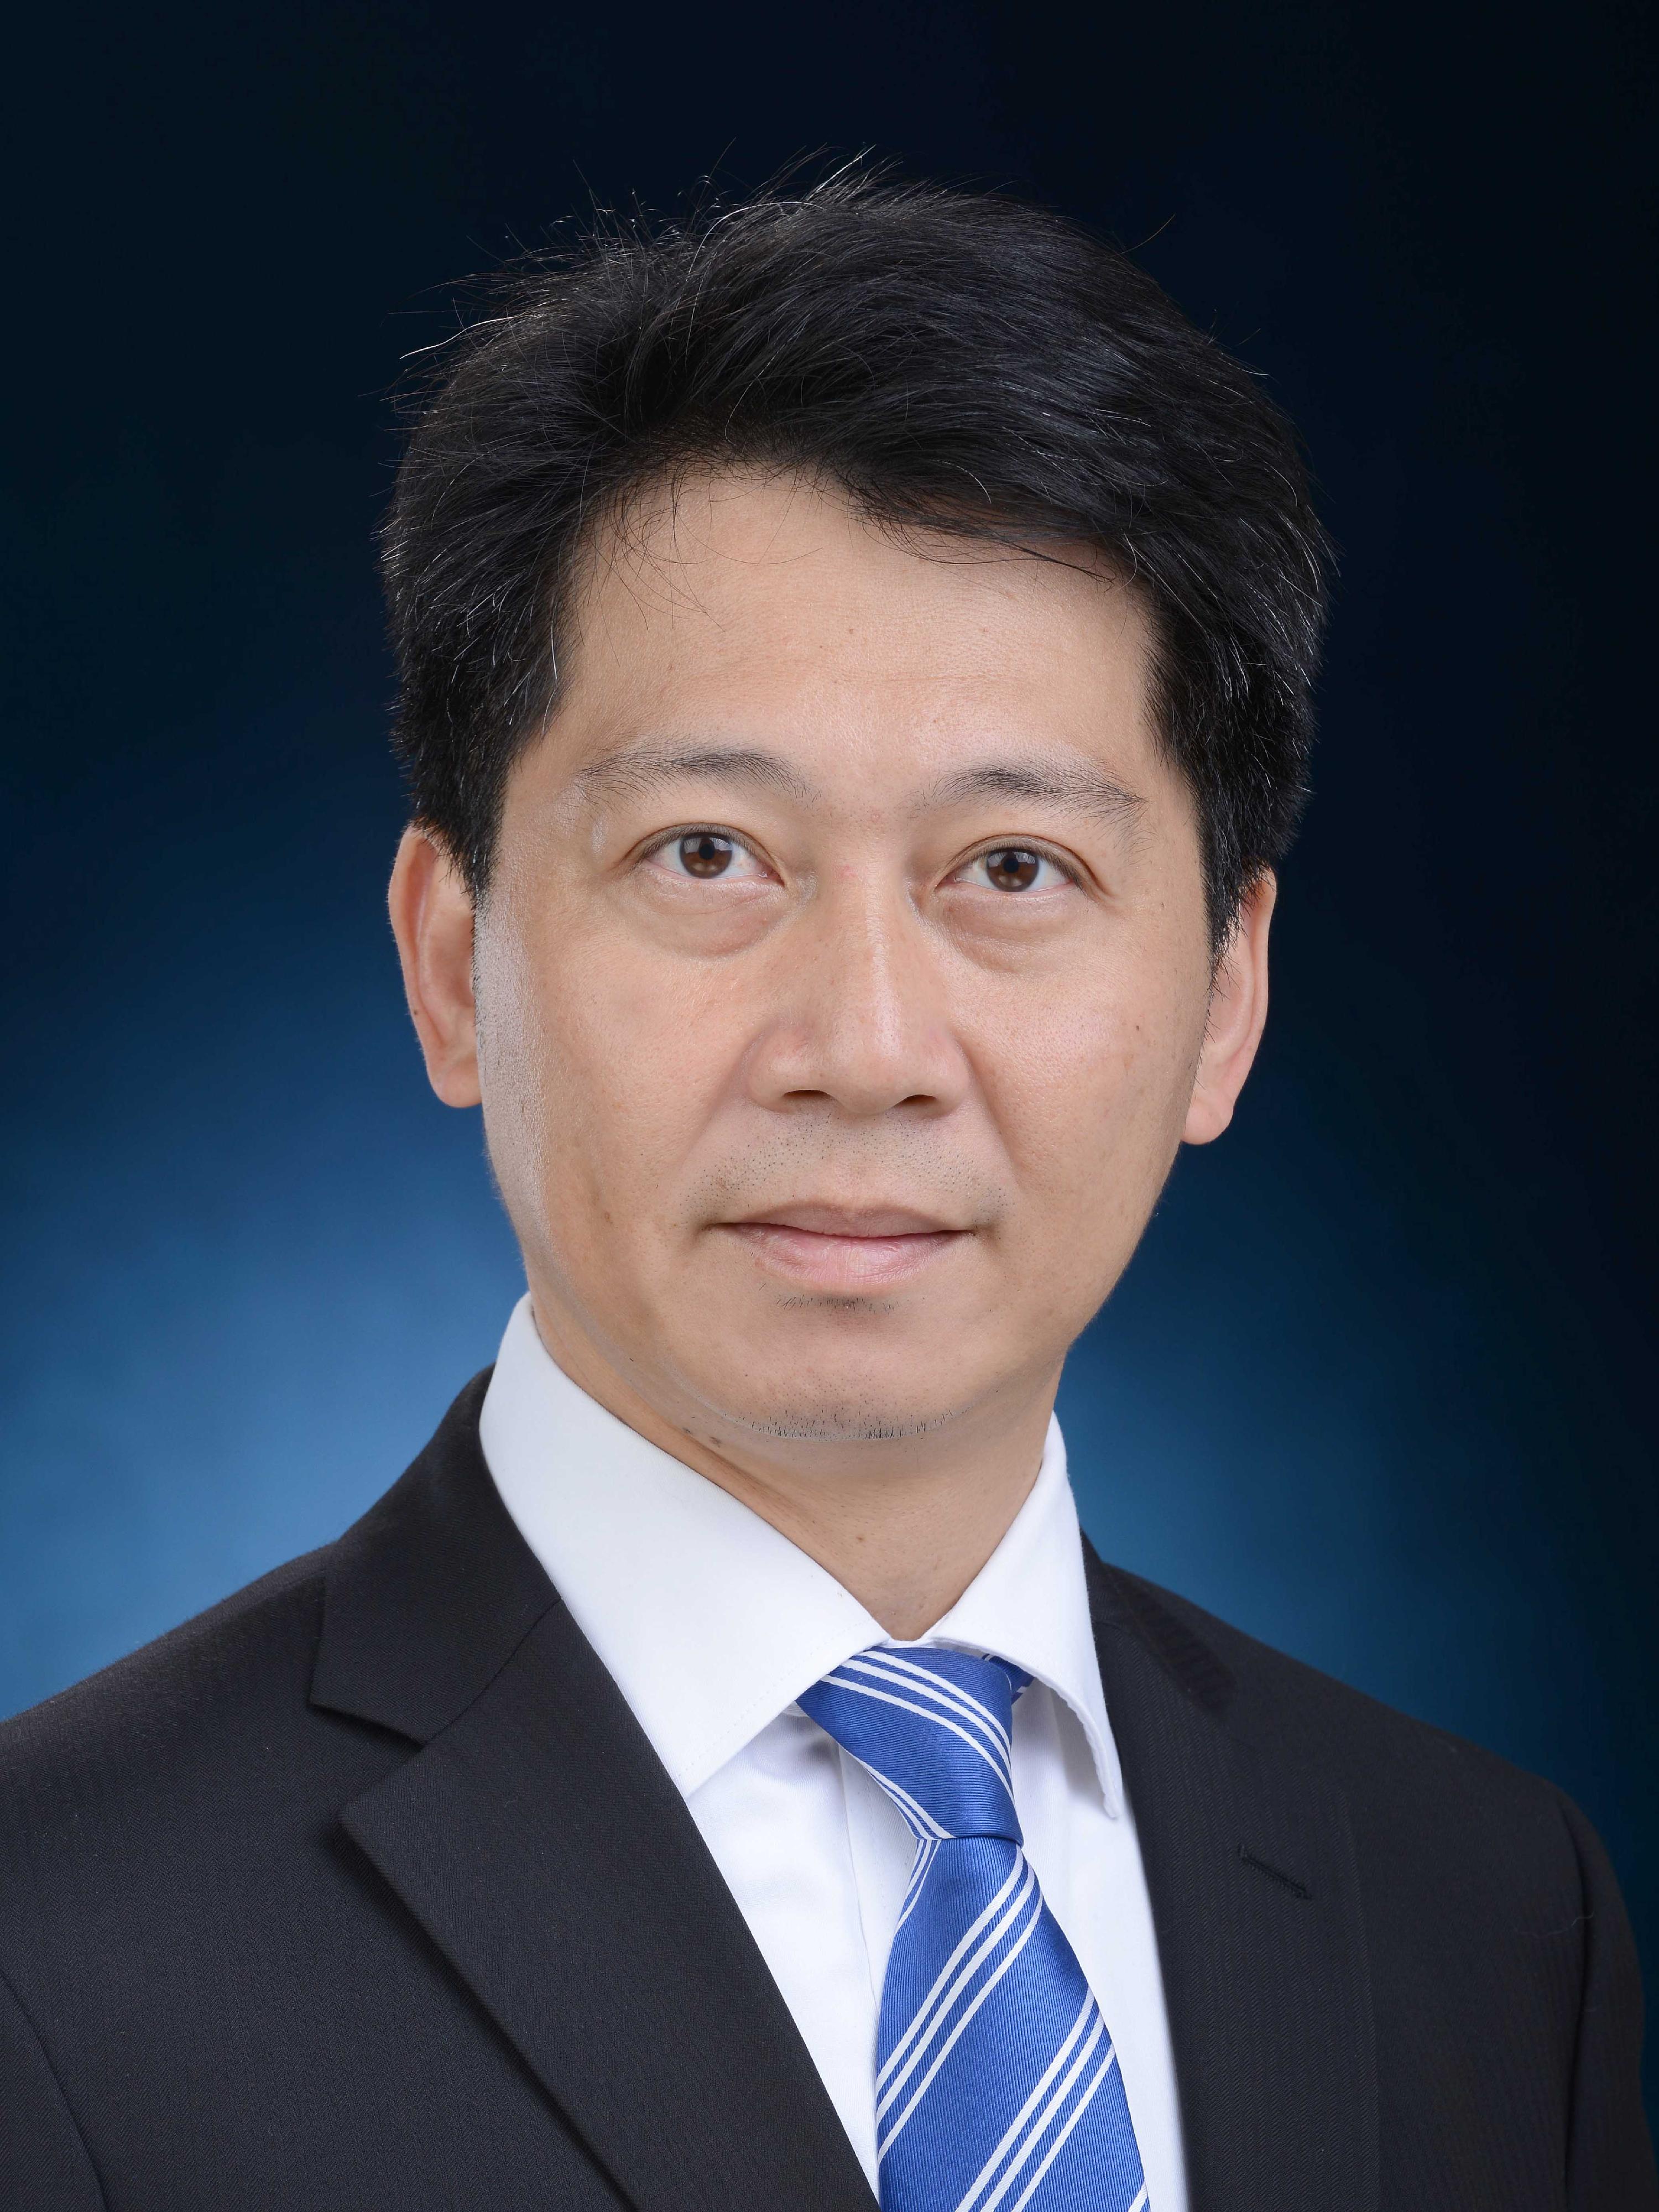 Mr Eddie Cheung Kwok-choi, Special Representative for Hong Kong Economic and Trade Affairs to the European Union, will take up the post of Director of Broadcasting in early October 2022 (date to be further announced).